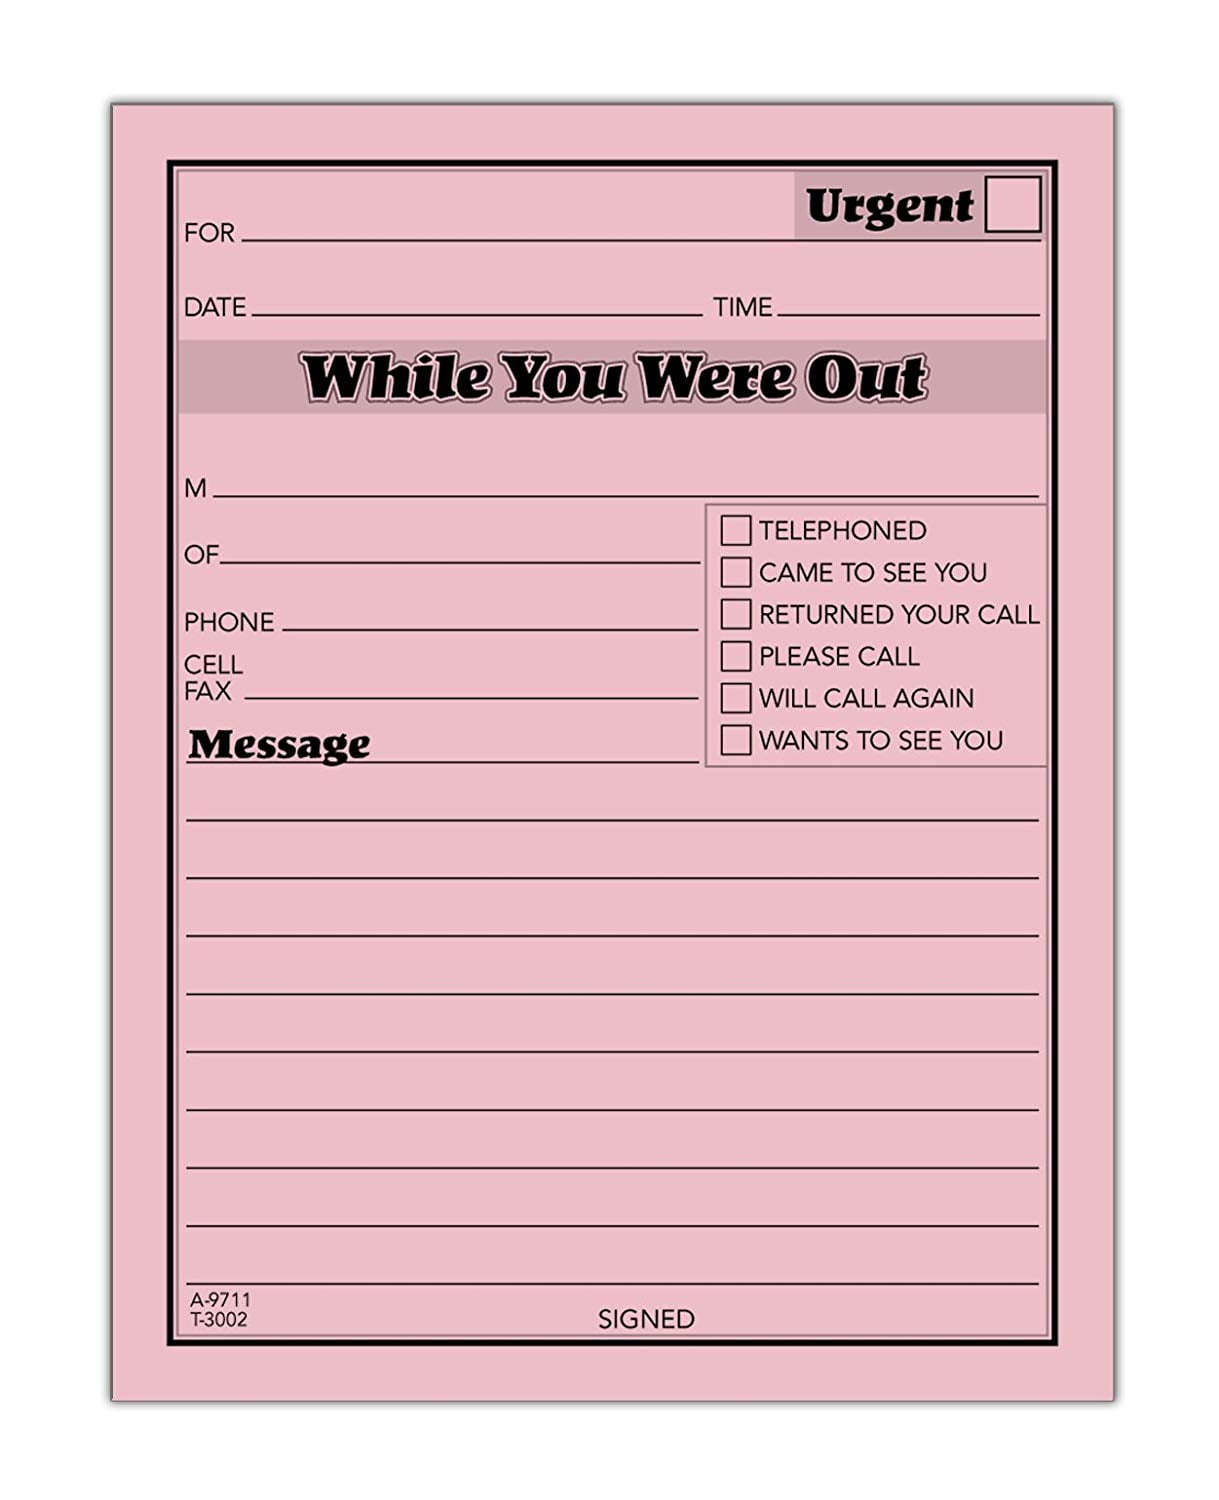 While You Were Out Pads 4 25 X 5 5 Inches Pink 50 Sheets Per Pad 12 Pads Per Pack 9711d Popular Wywo Message Pads Are Printed On Pink Paper Stock By Adams Walmart Com